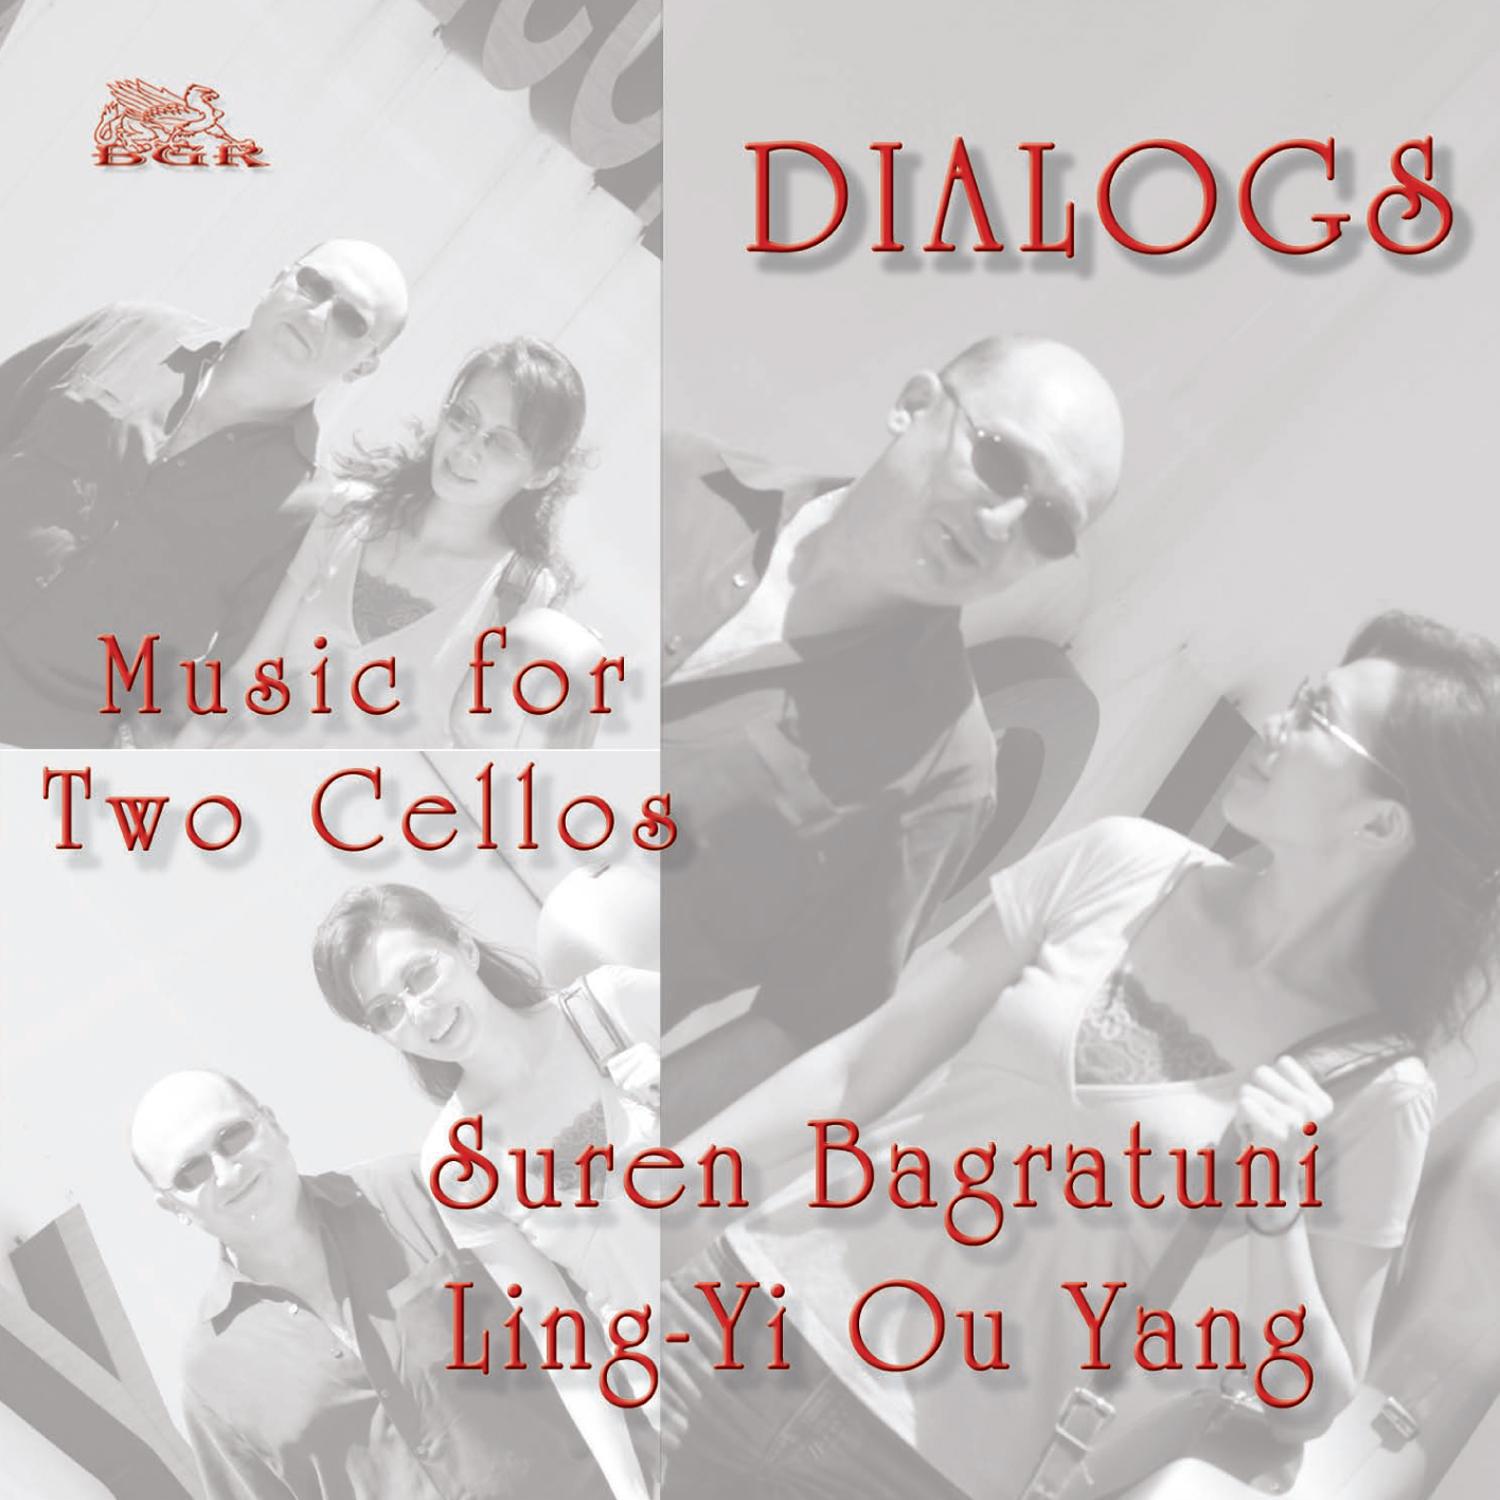 Dialogs. Music for Two Cellos